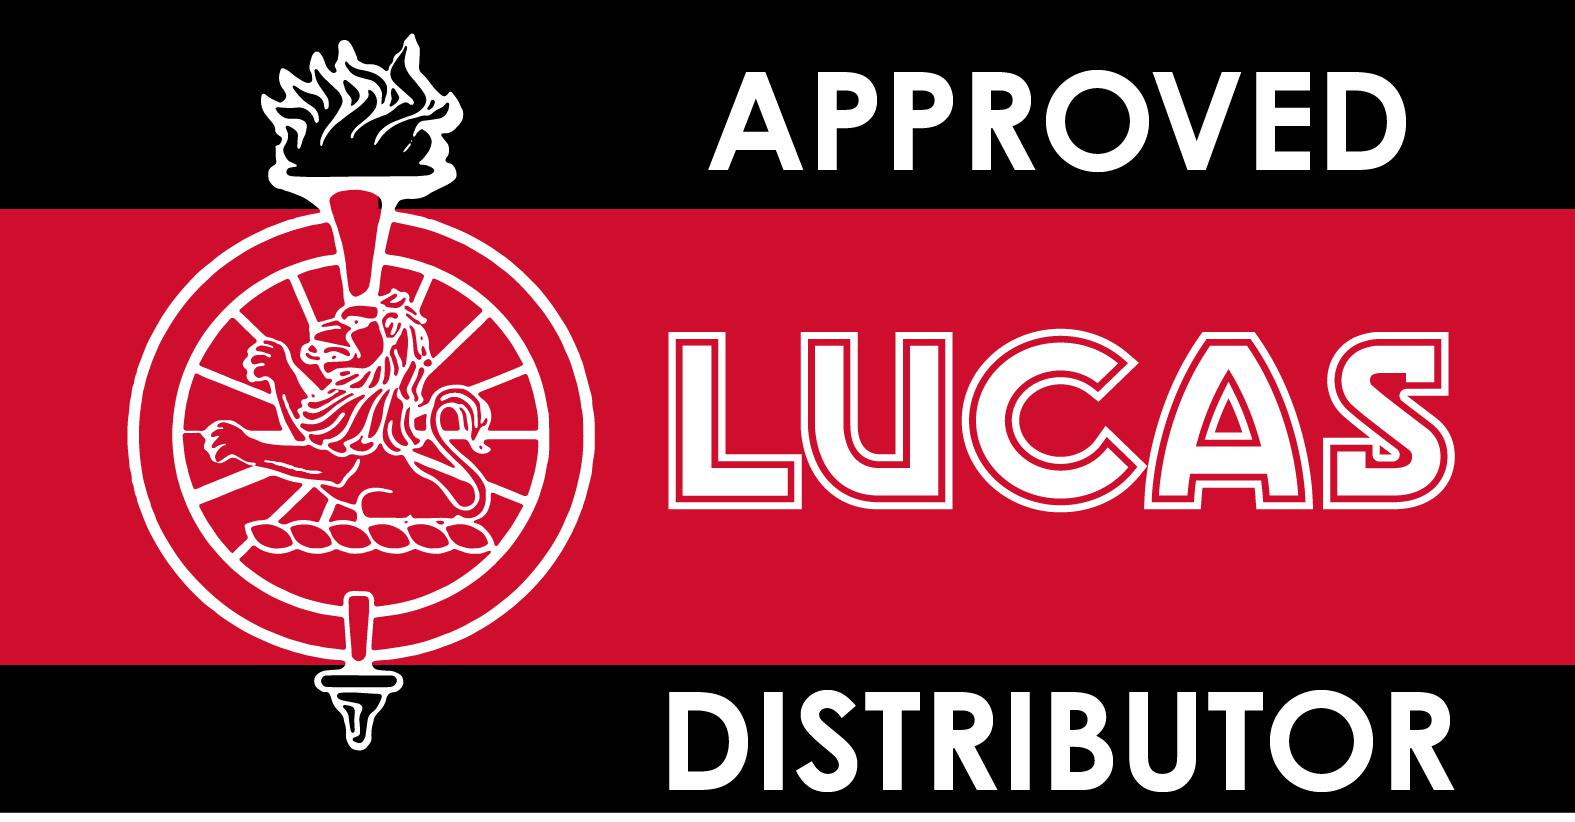 approved lucas distributor